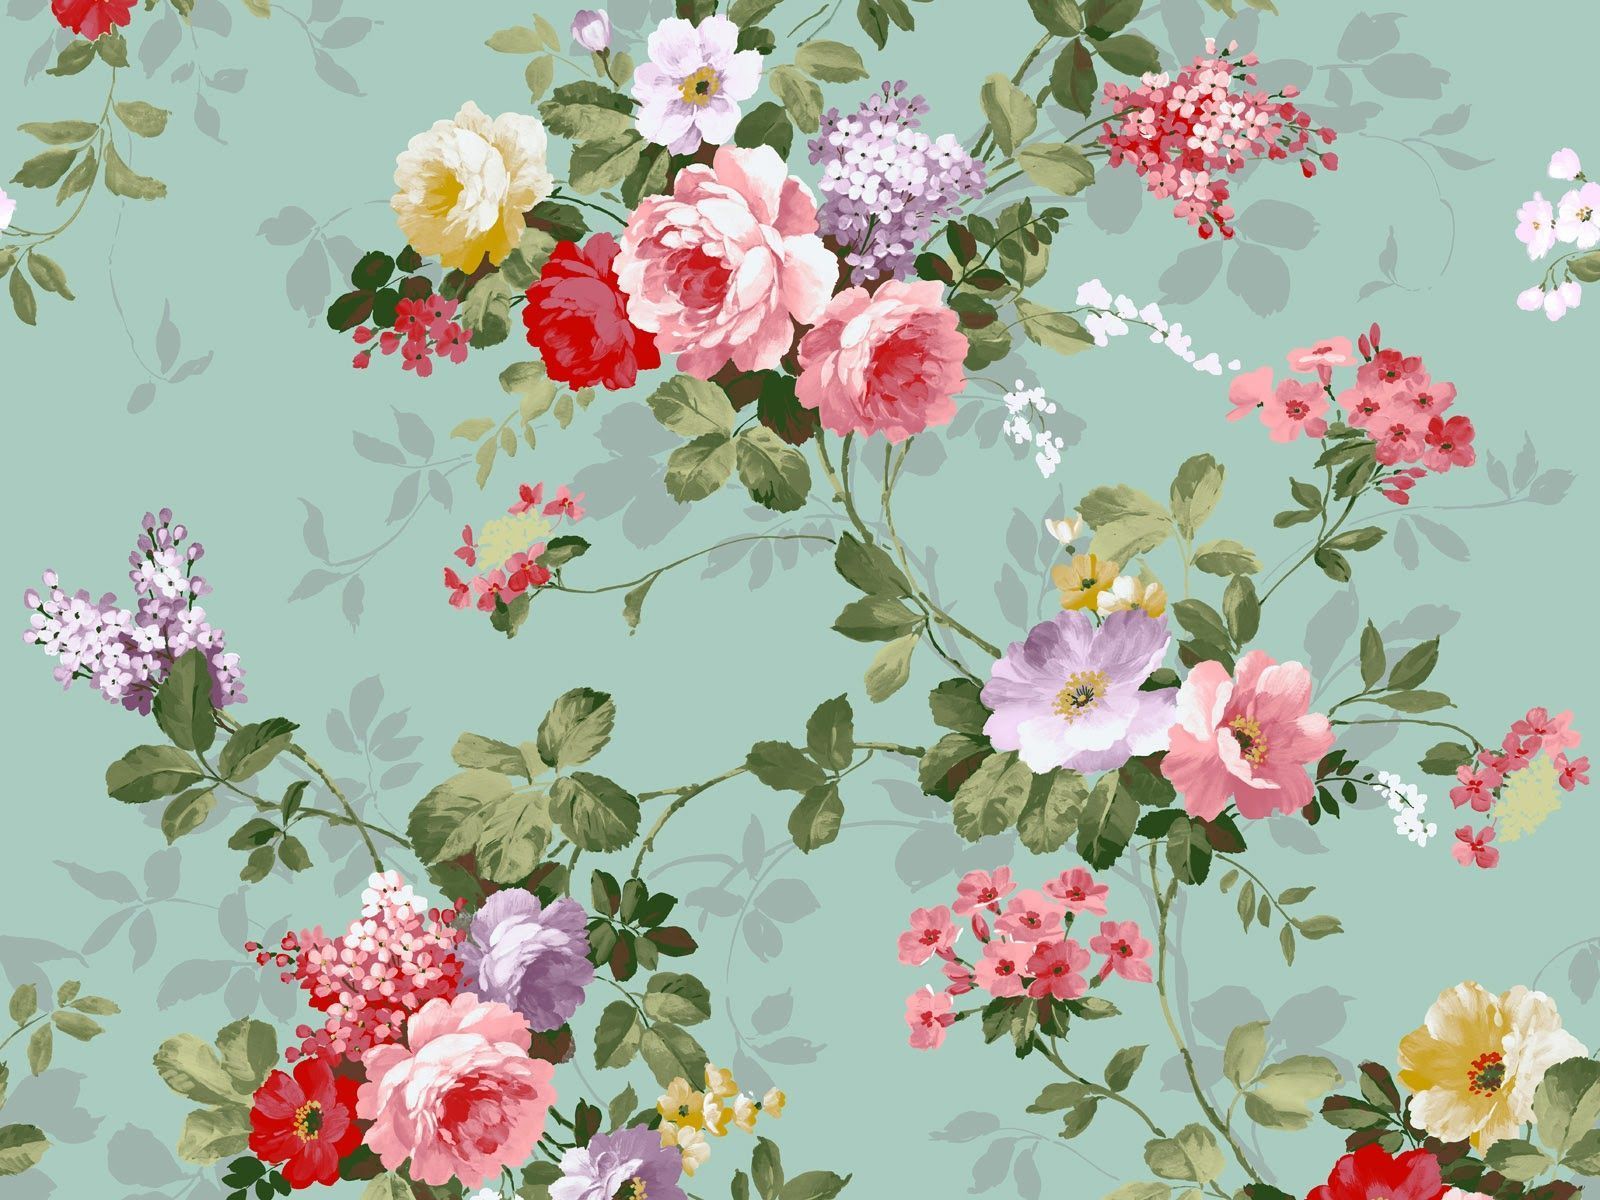 Aesthetic Floral Wallpapers